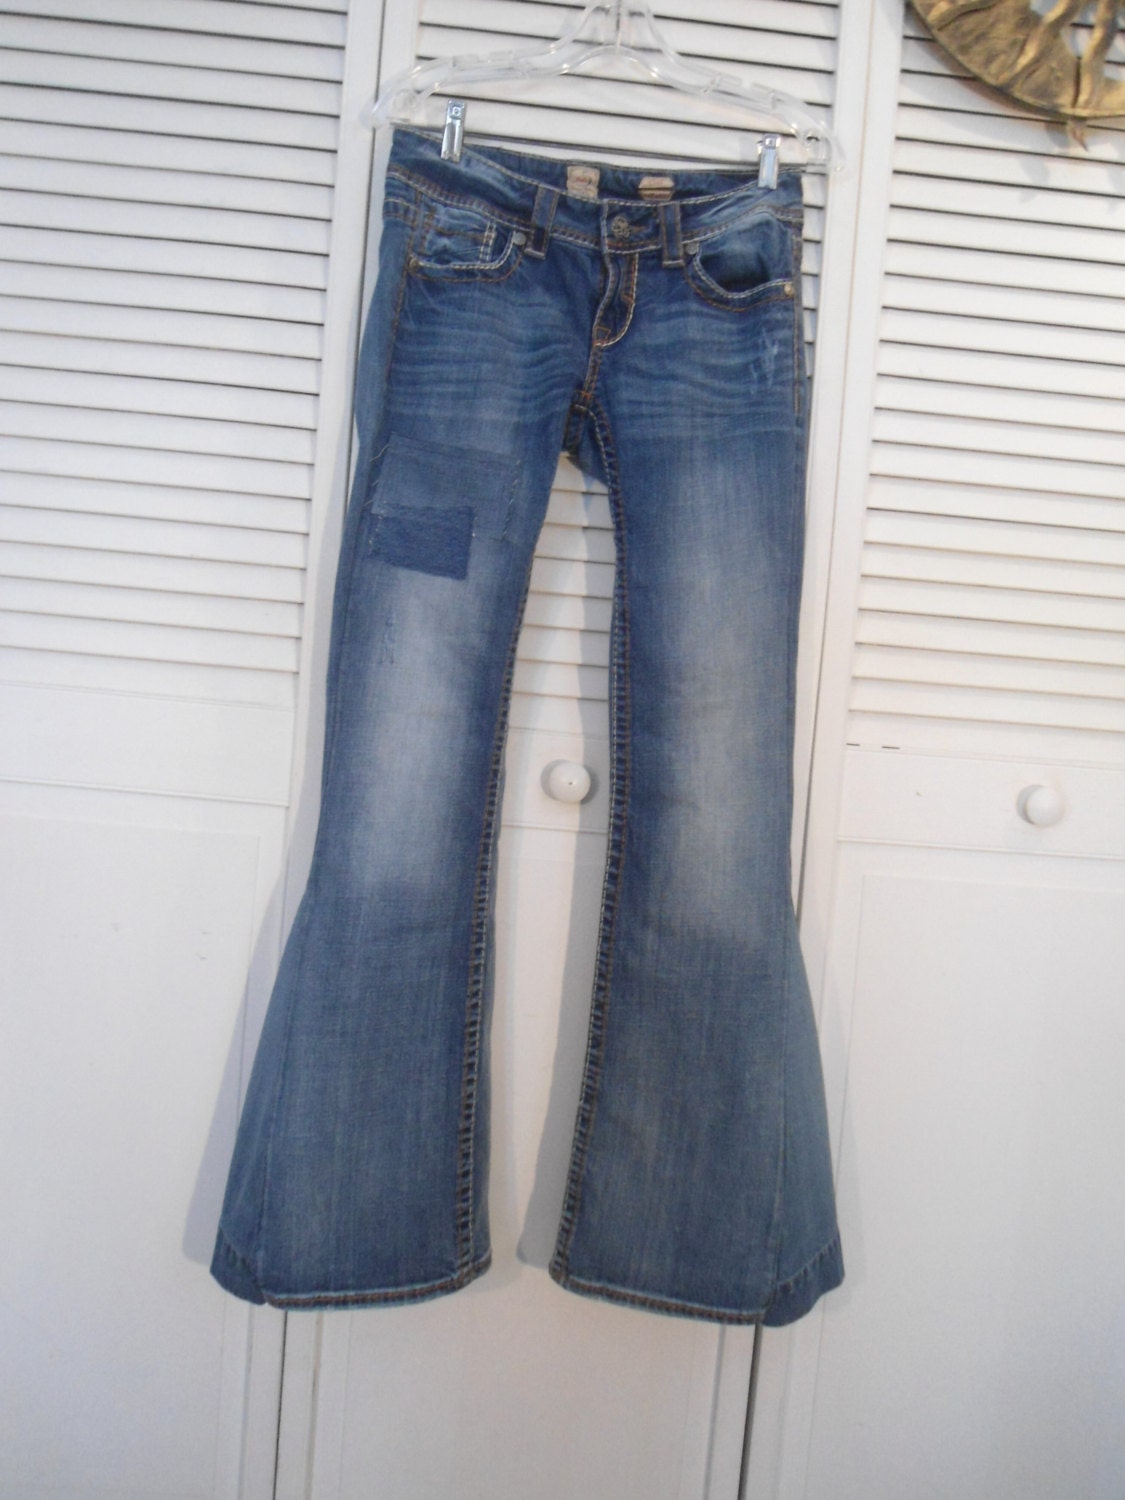 Hip Hugger Jeans Patched Bell Bottom Low Rise Jeans Hippie